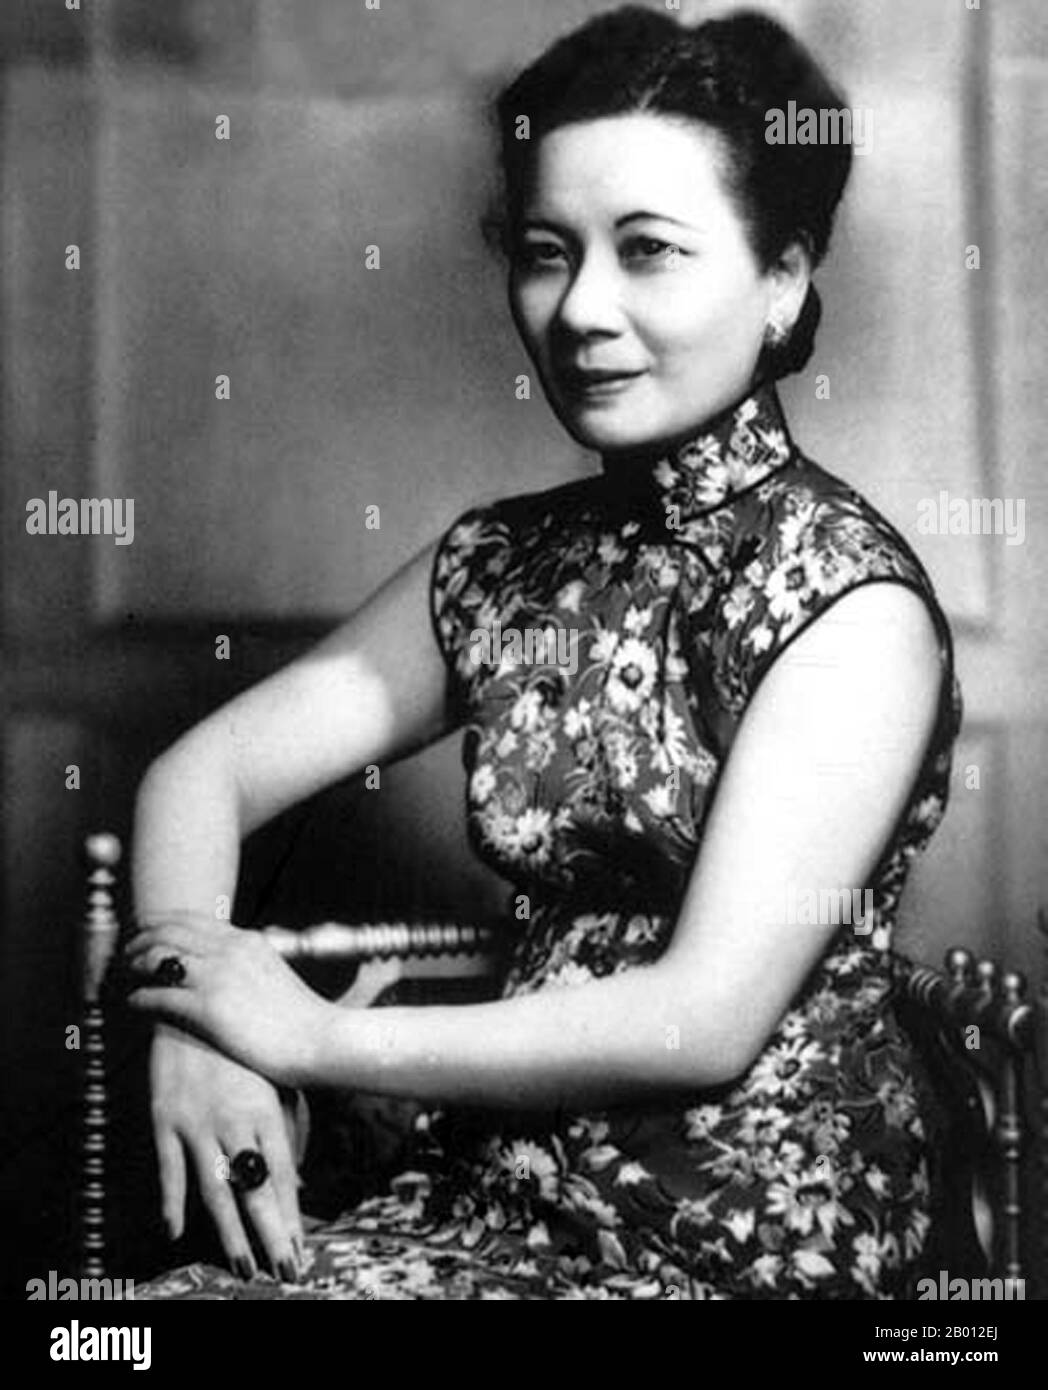 China: Soong May-ling or Mei-ling, also known as Madame Chiang Kai-shek (Song Meiling, 1898-2003), First Lady of the Republic of China (ROC) and wife of President Chiang Kai-shek, 1940s.  Soong May-ling or Mei-ling, also known as Madame Chiang Kai-shek (Song Meiling, 1898-2003), First Lady of the Republic of China (ROC) and wife of President Chiang Kai-shek. She was a politician and painter. The youngest and the last surviving of the three Soong sisters, she played a prominent role in the politics of the Republic of China and was the sister in law of President Sun Yat-sen, founder of the ROC. Stock Photo